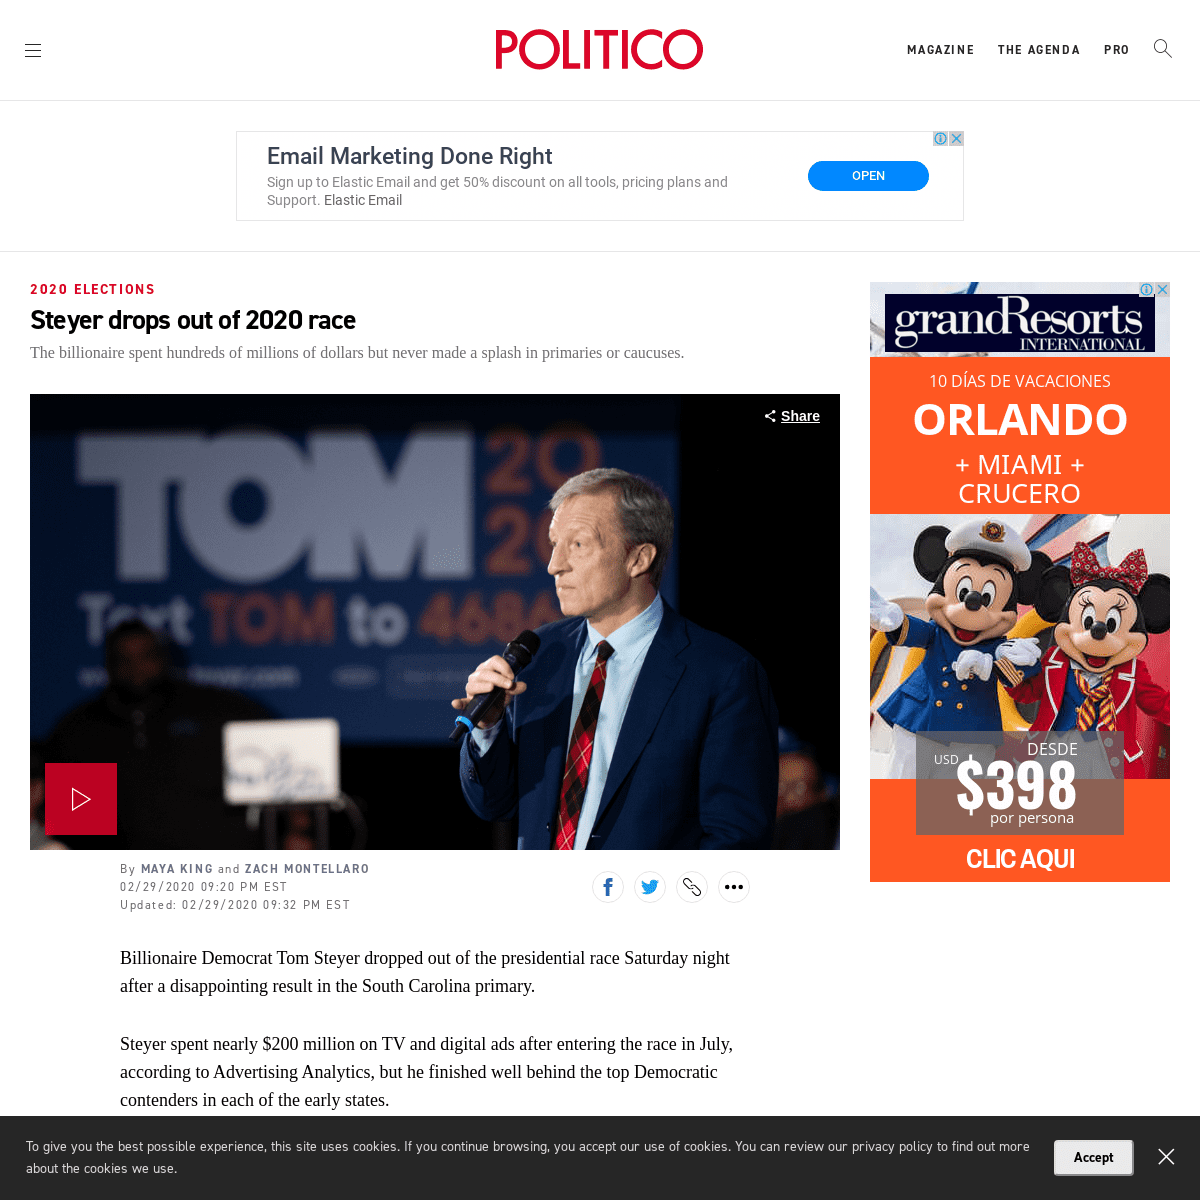 A complete backup of www.politico.com/news/2020/02/29/steyer-drops-out-of-2020-race-118370